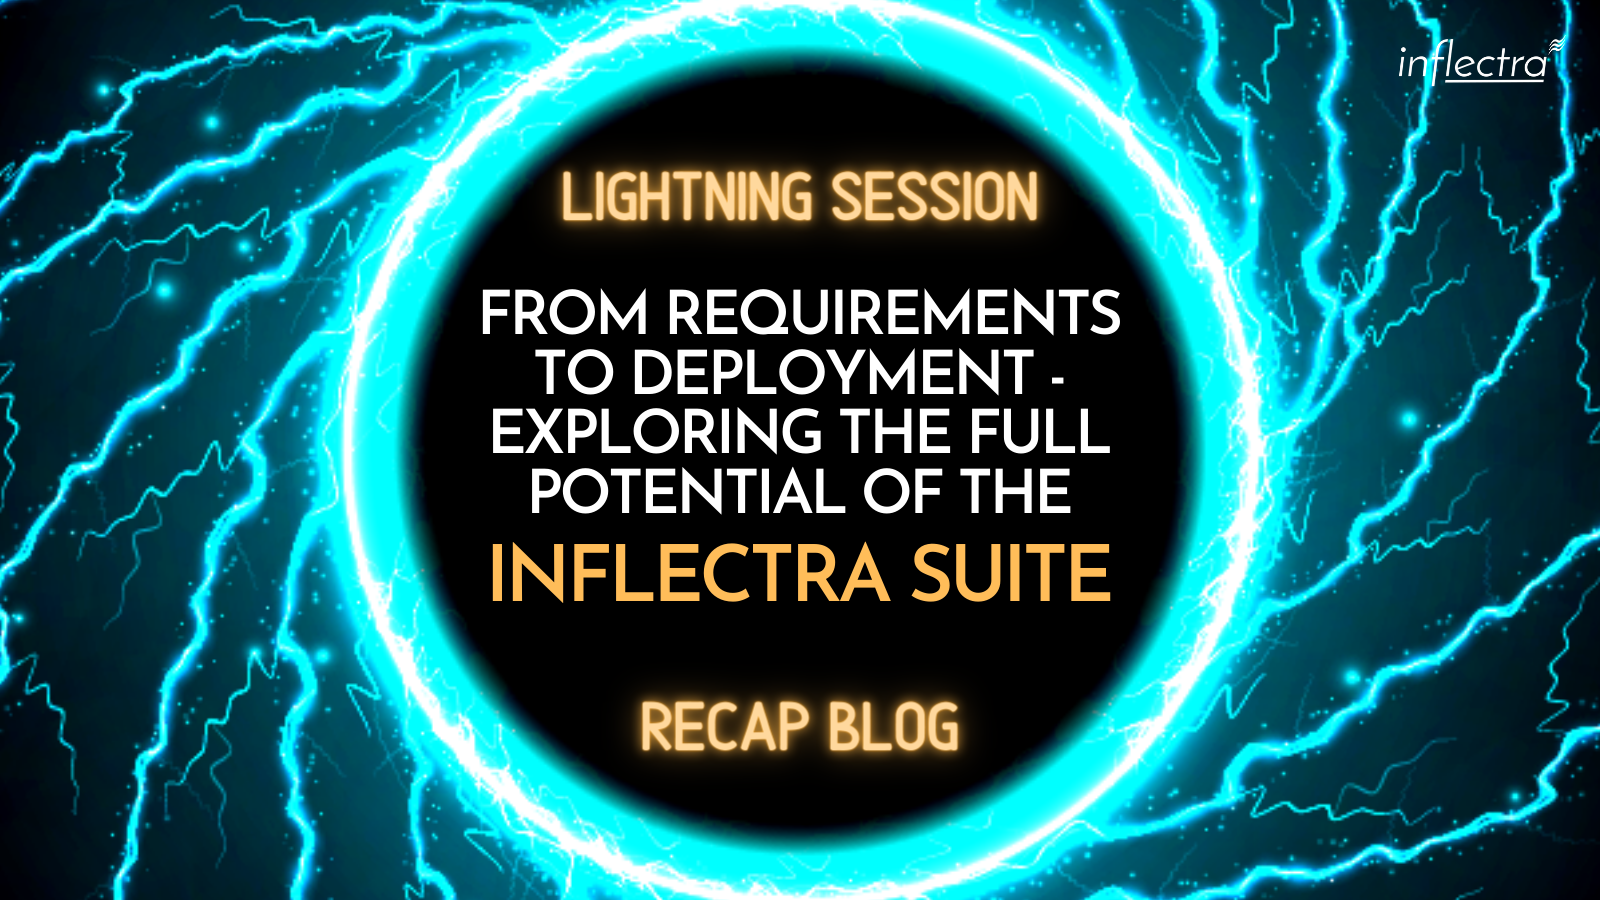 lightning-session-from-requirements-to-deployment-exploring-the-full-potential-of-the-infliectra-suite-image